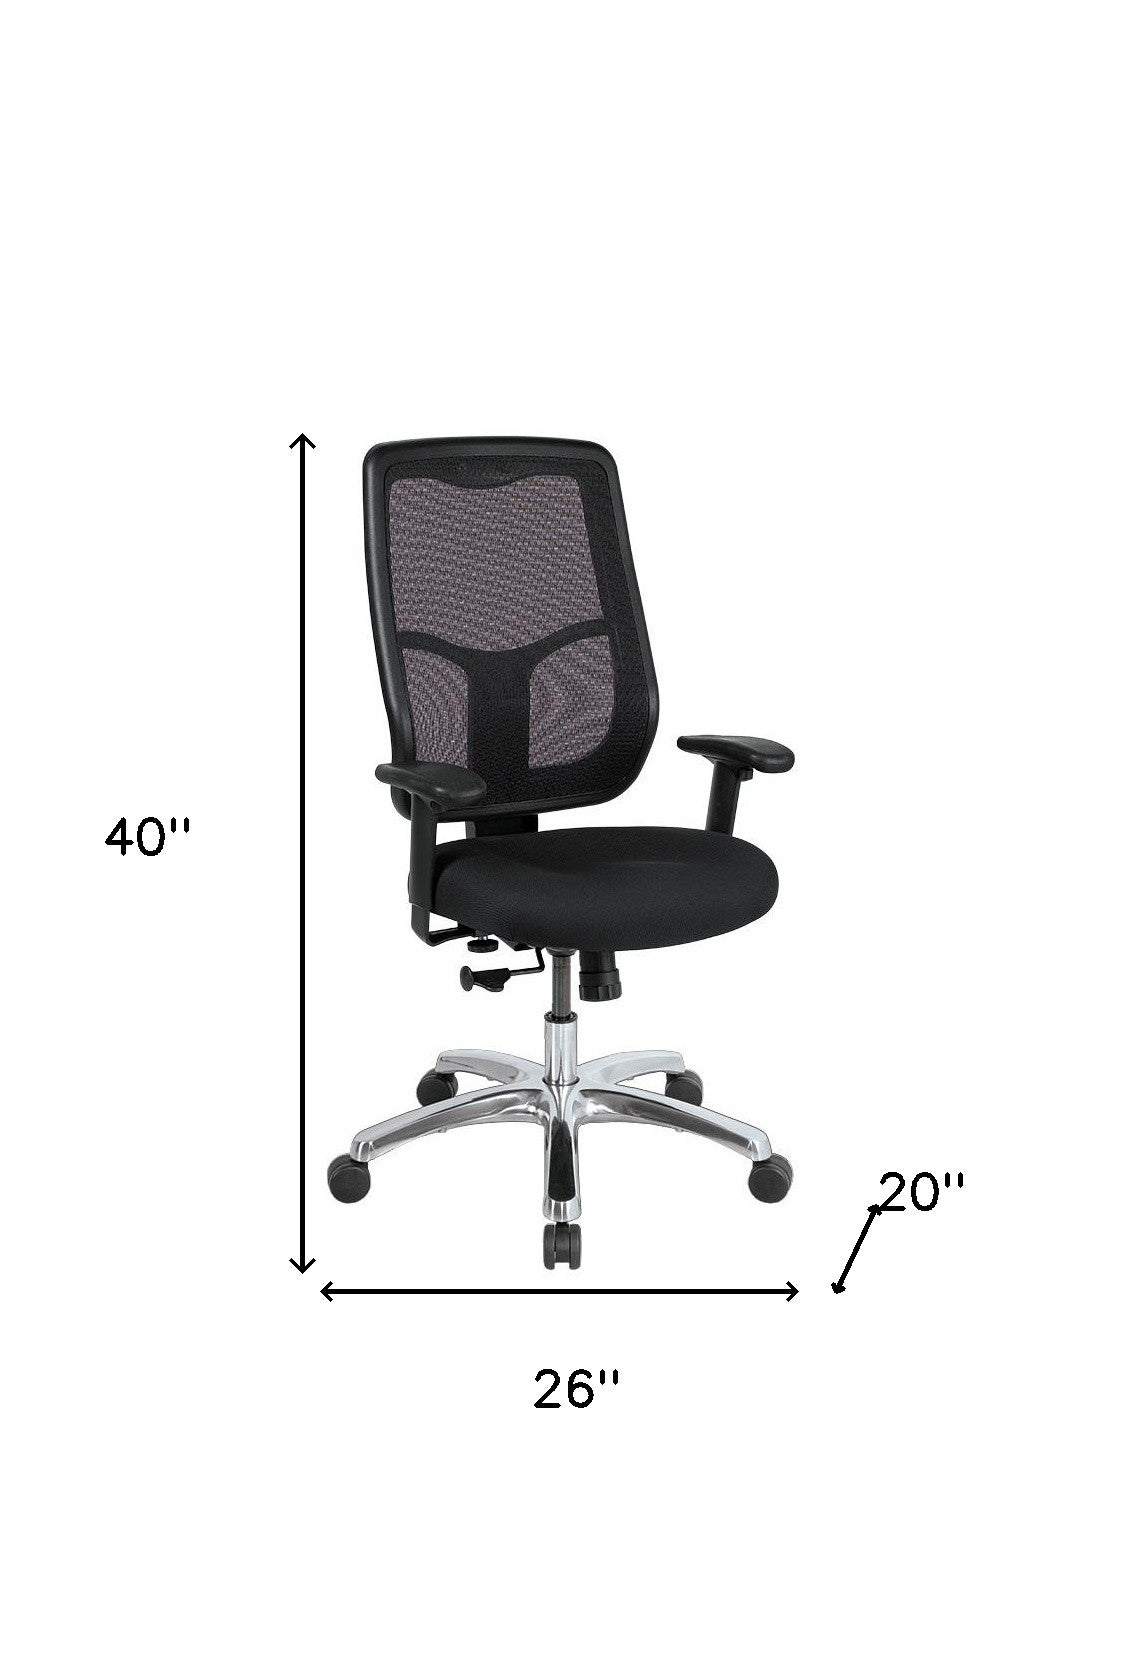 Black and Silver Adjustable Swivel Mesh Rolling Office Chair